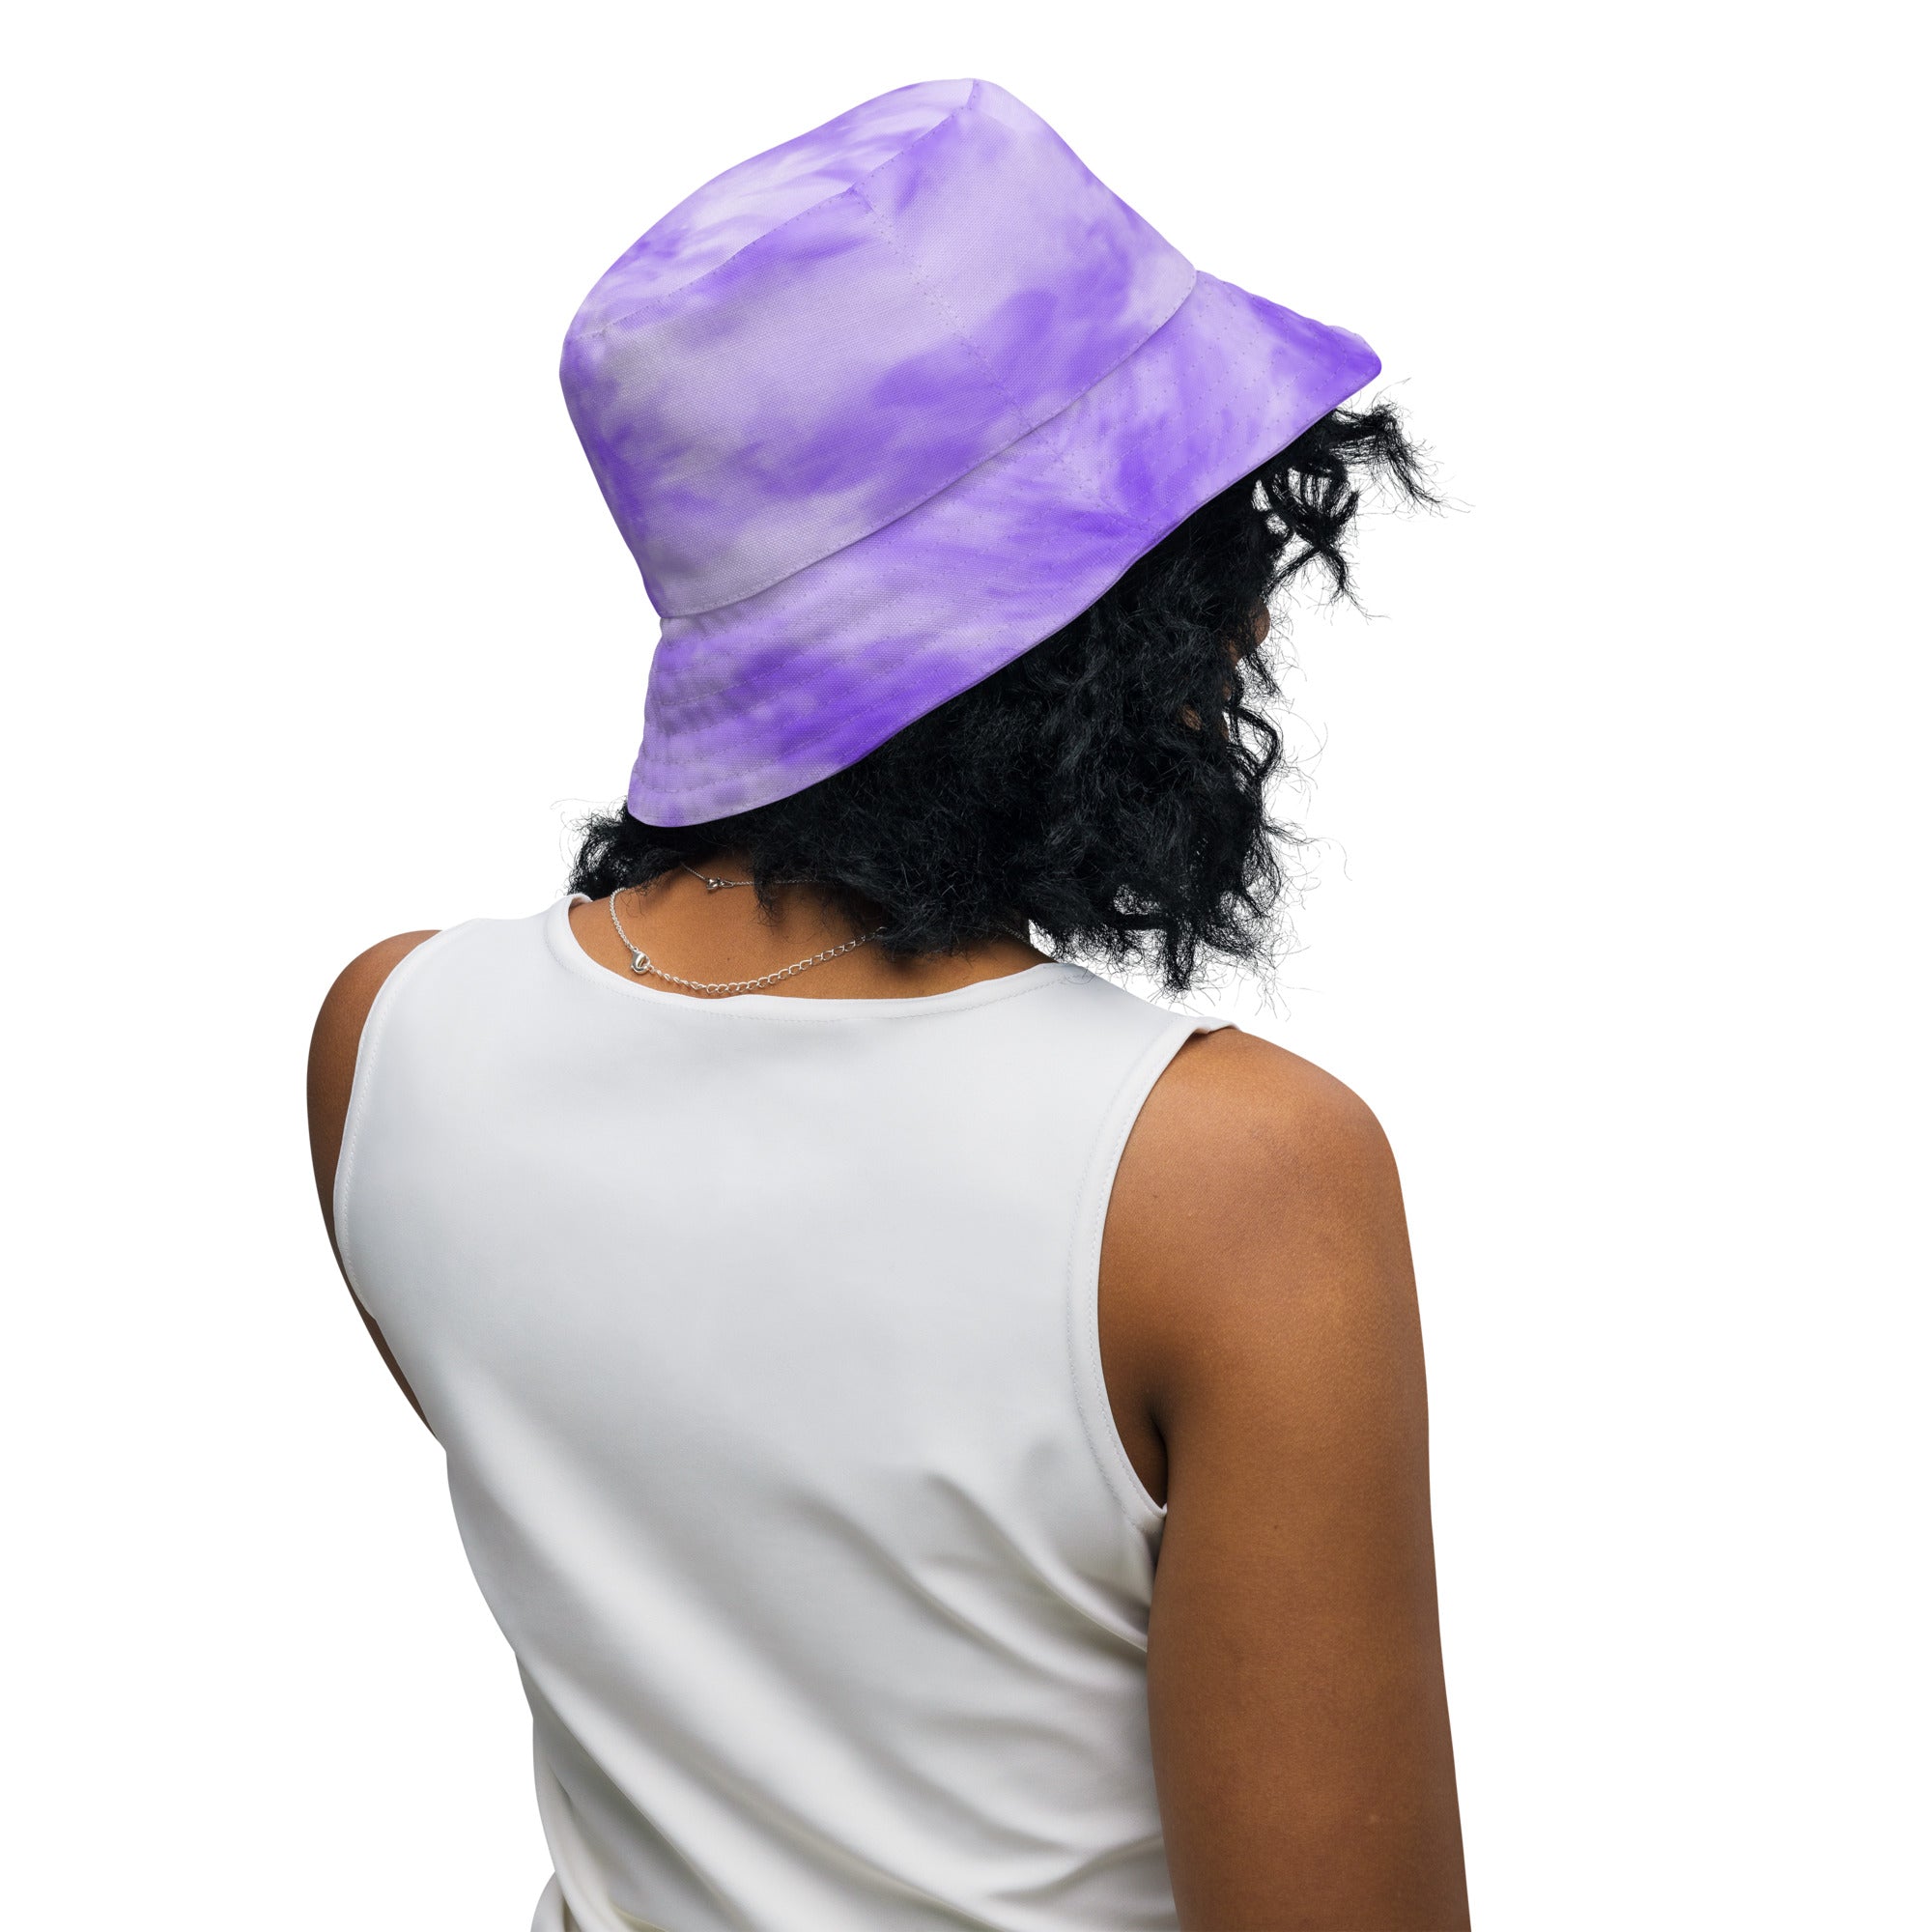 "Purple Haze: Dive into Tie-Dye Chic with Our Bucket Hat", lioness-love